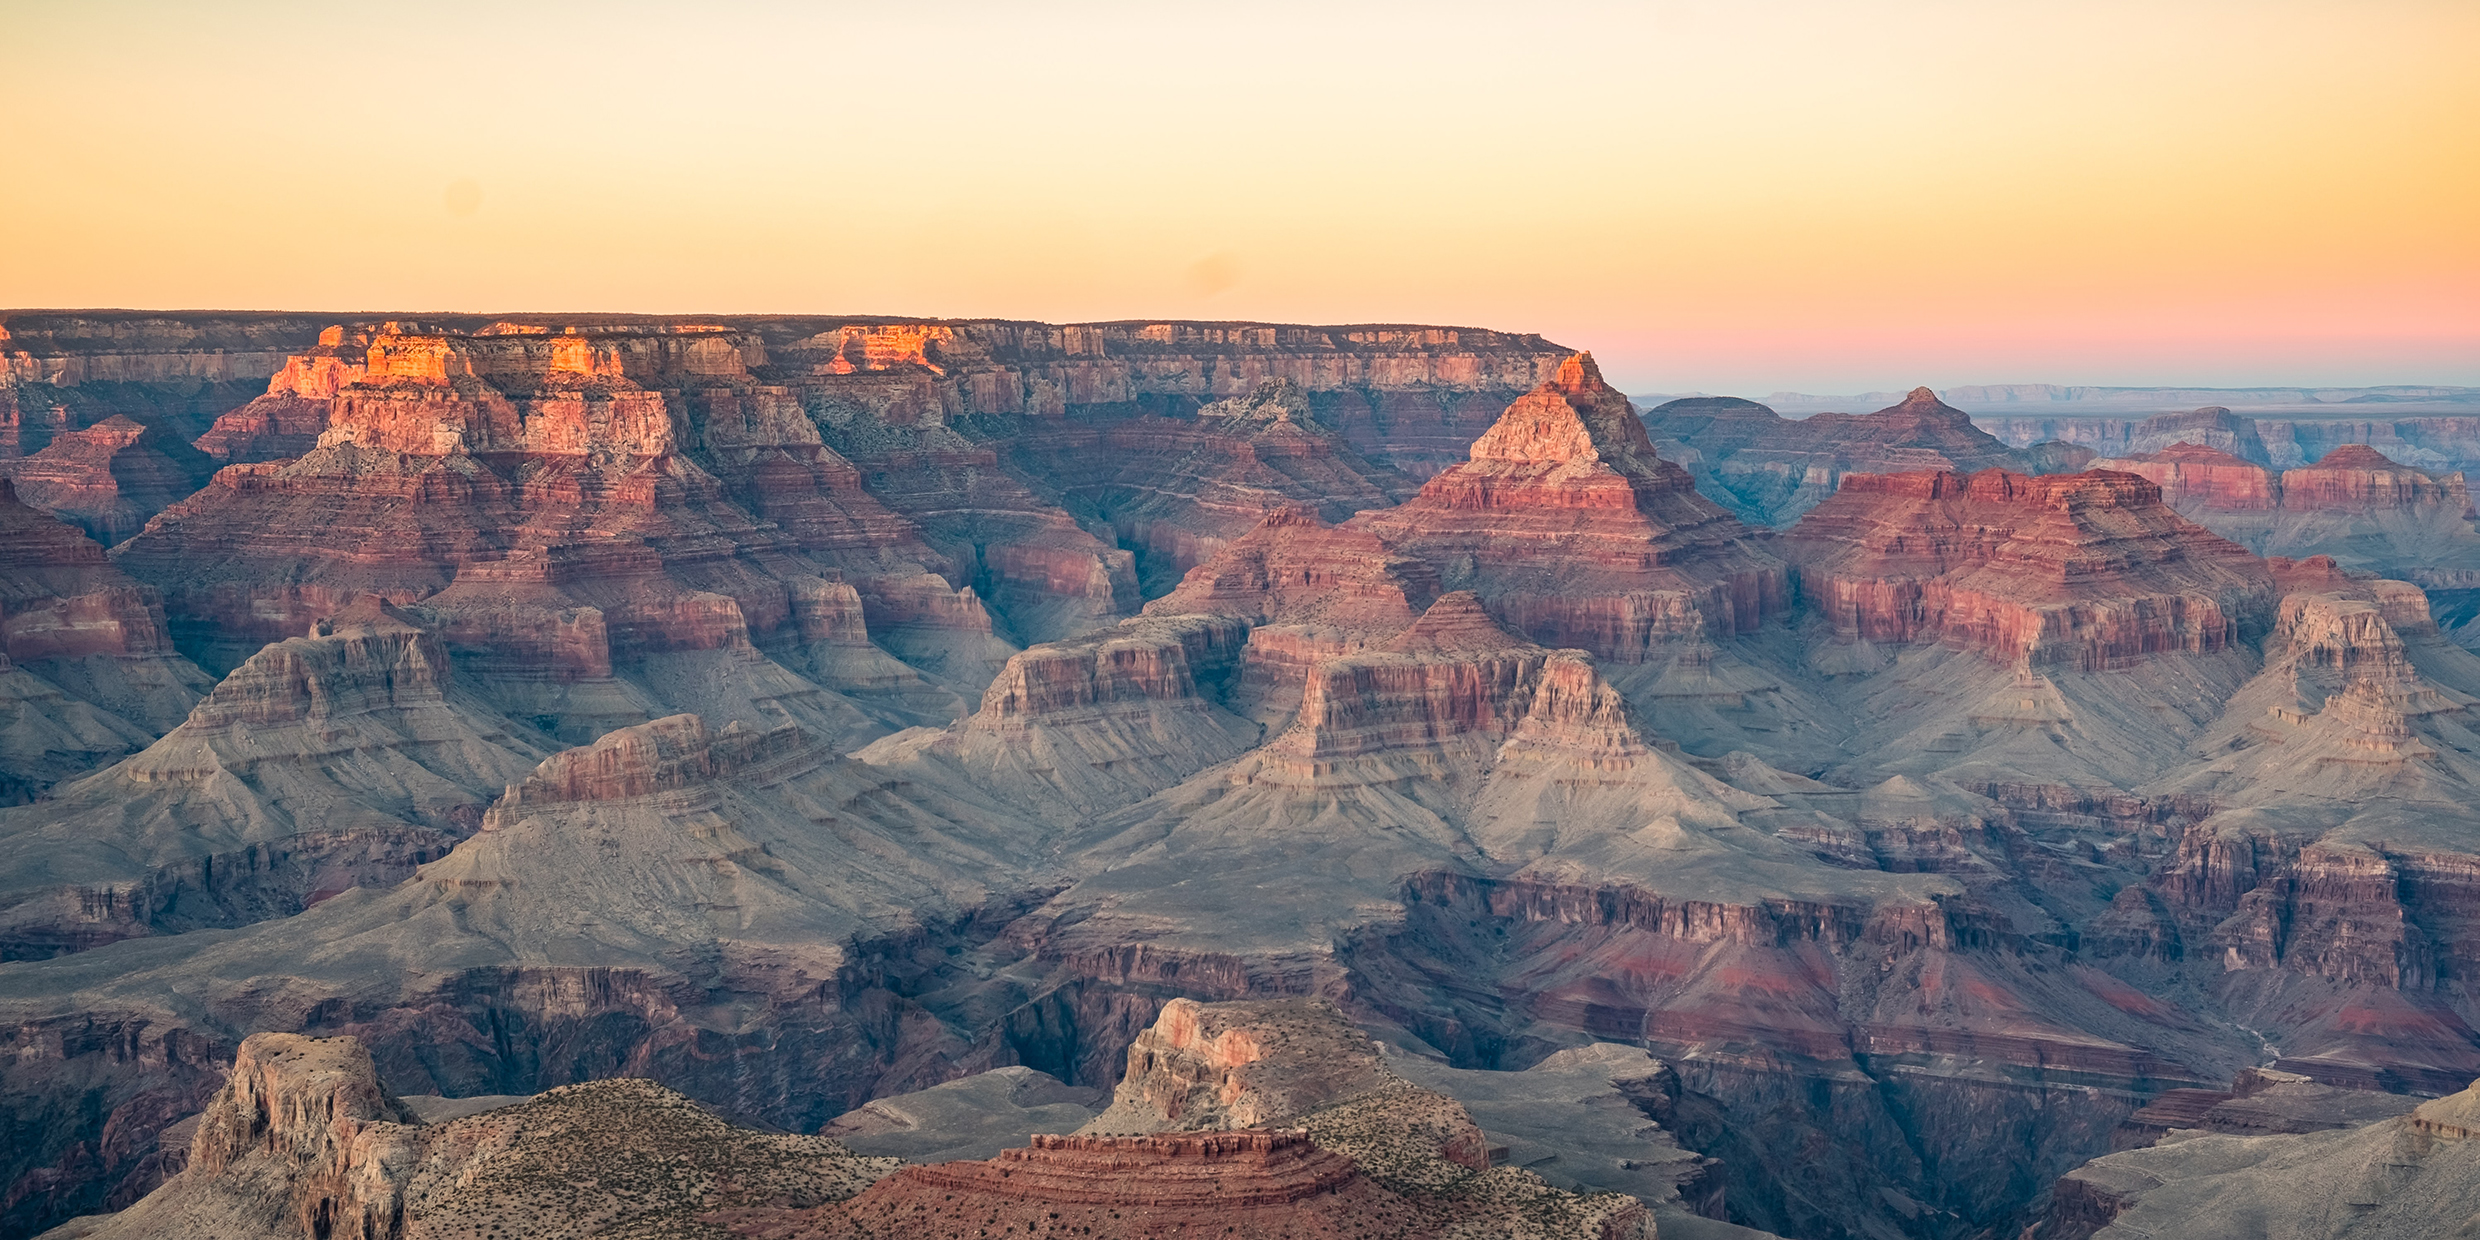 Image of the Grand Canyon